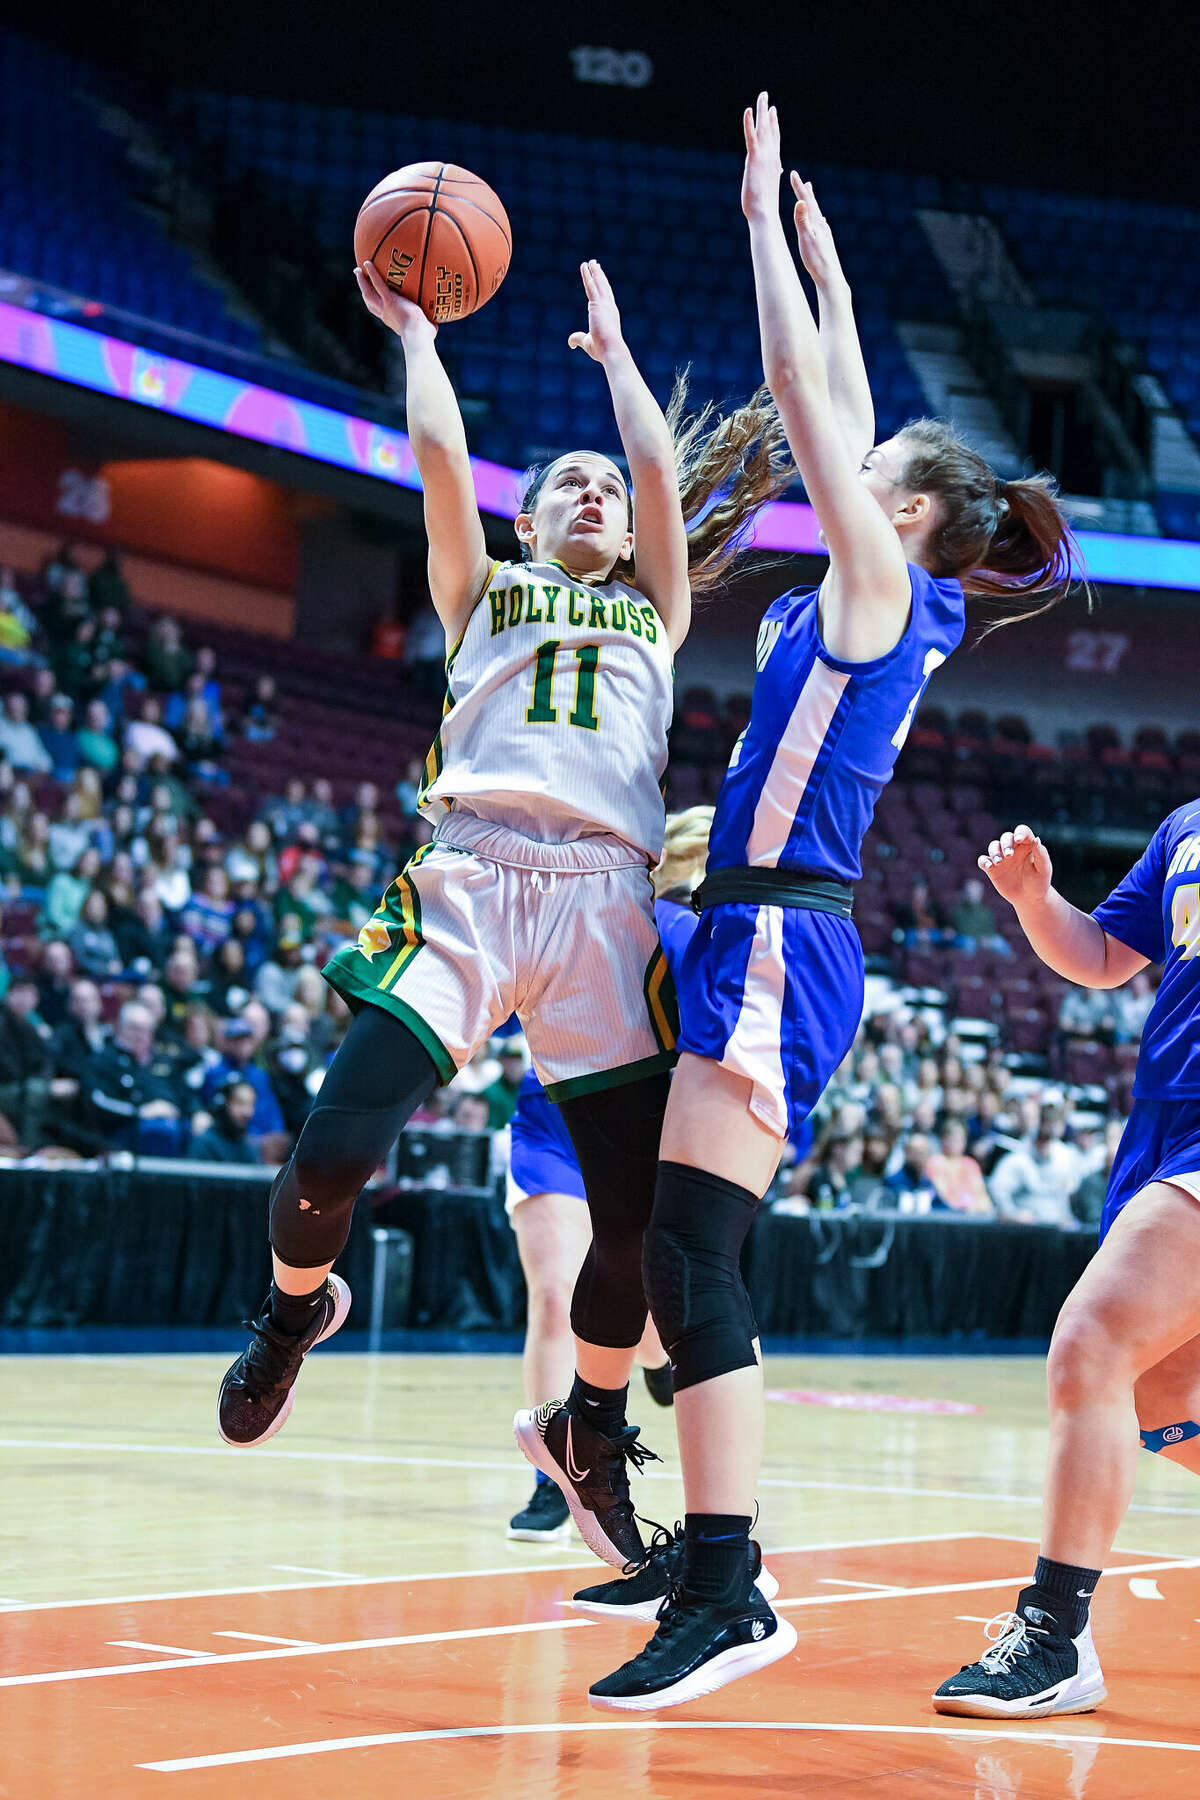 Holy Cross high's Mya Zaccagnini during the CIAC Class M Girls final against Bacon Academy at Mohegan Sun Arena, Sunday, March 20, 2022.